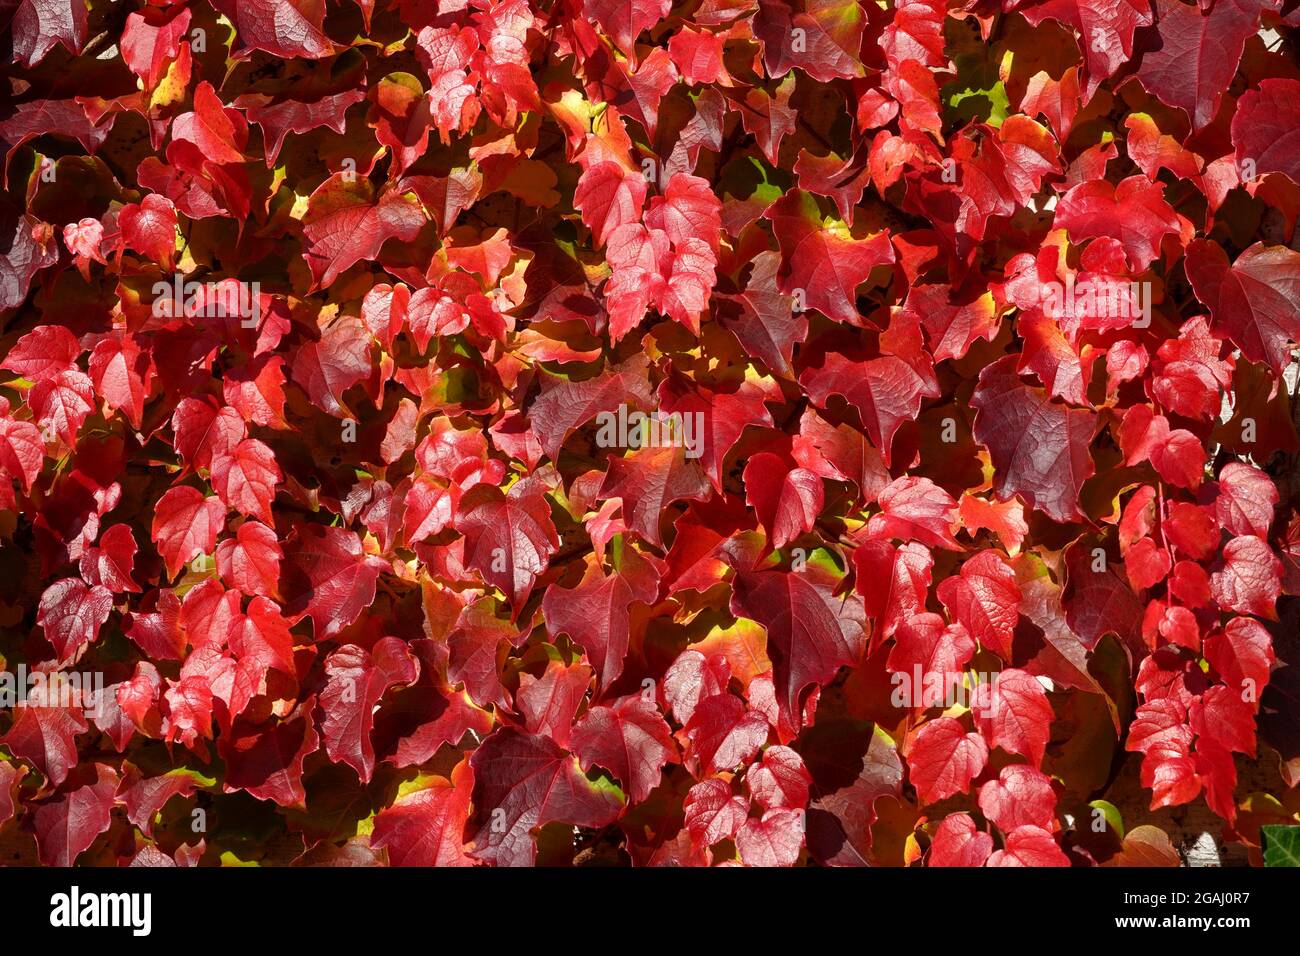 Boston ivy in autumn in various shades of red color. The creeping plant as a seasonal background. In Latin it is called Parthenocissus tricuspidata. Stock Photo